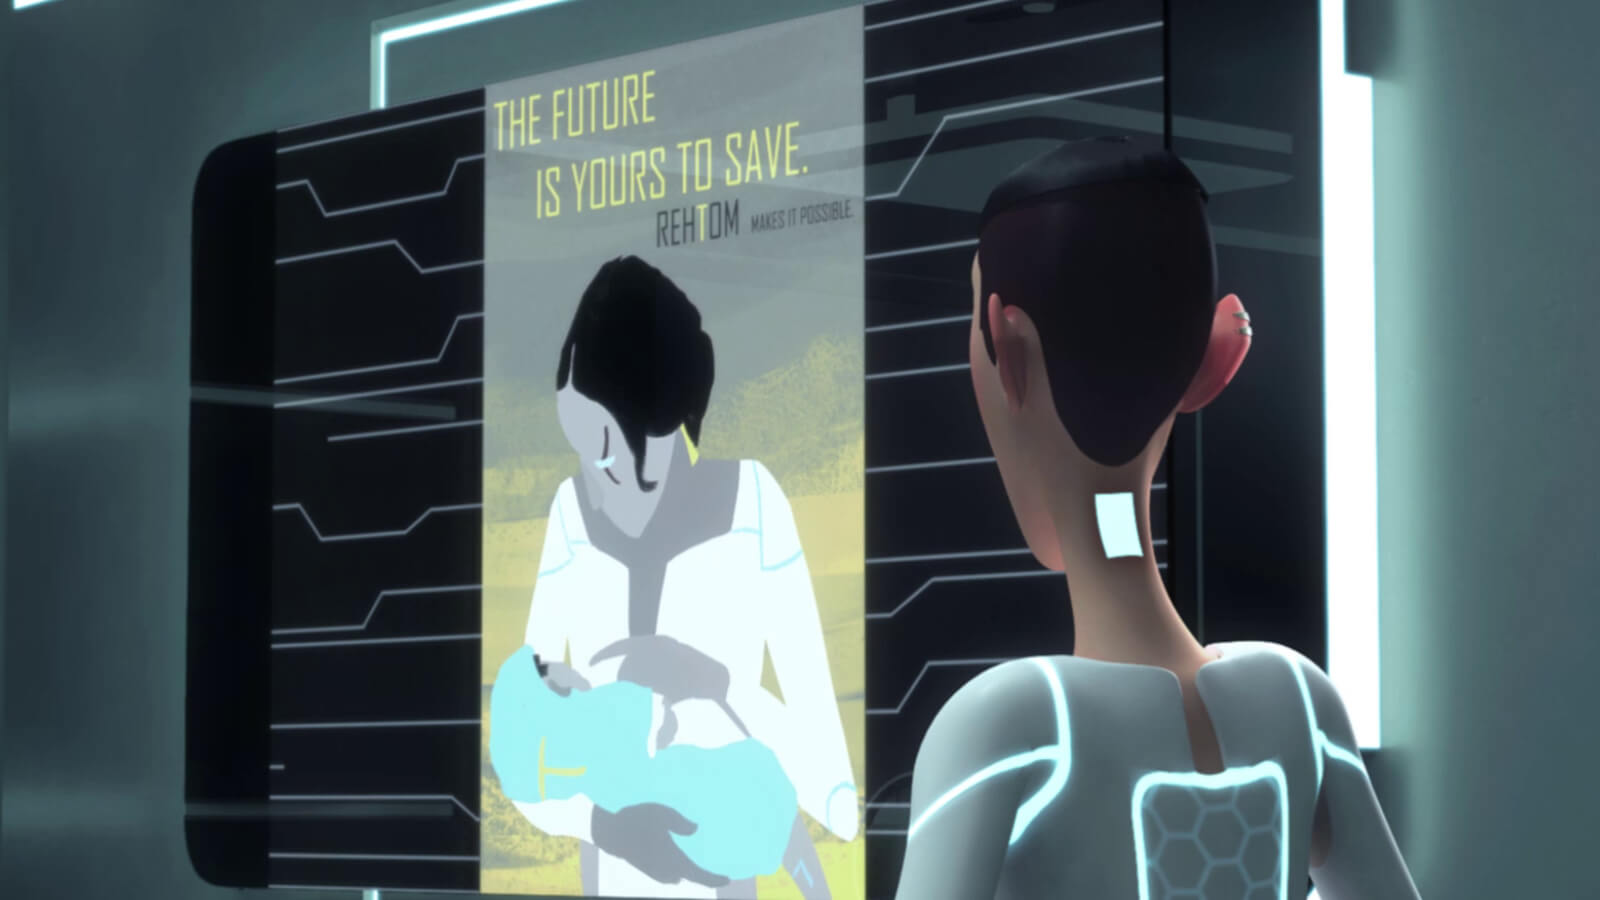 A person in a futuristic setting looks at a poster of a mother with a child in her arms, with "The future is yours to save."